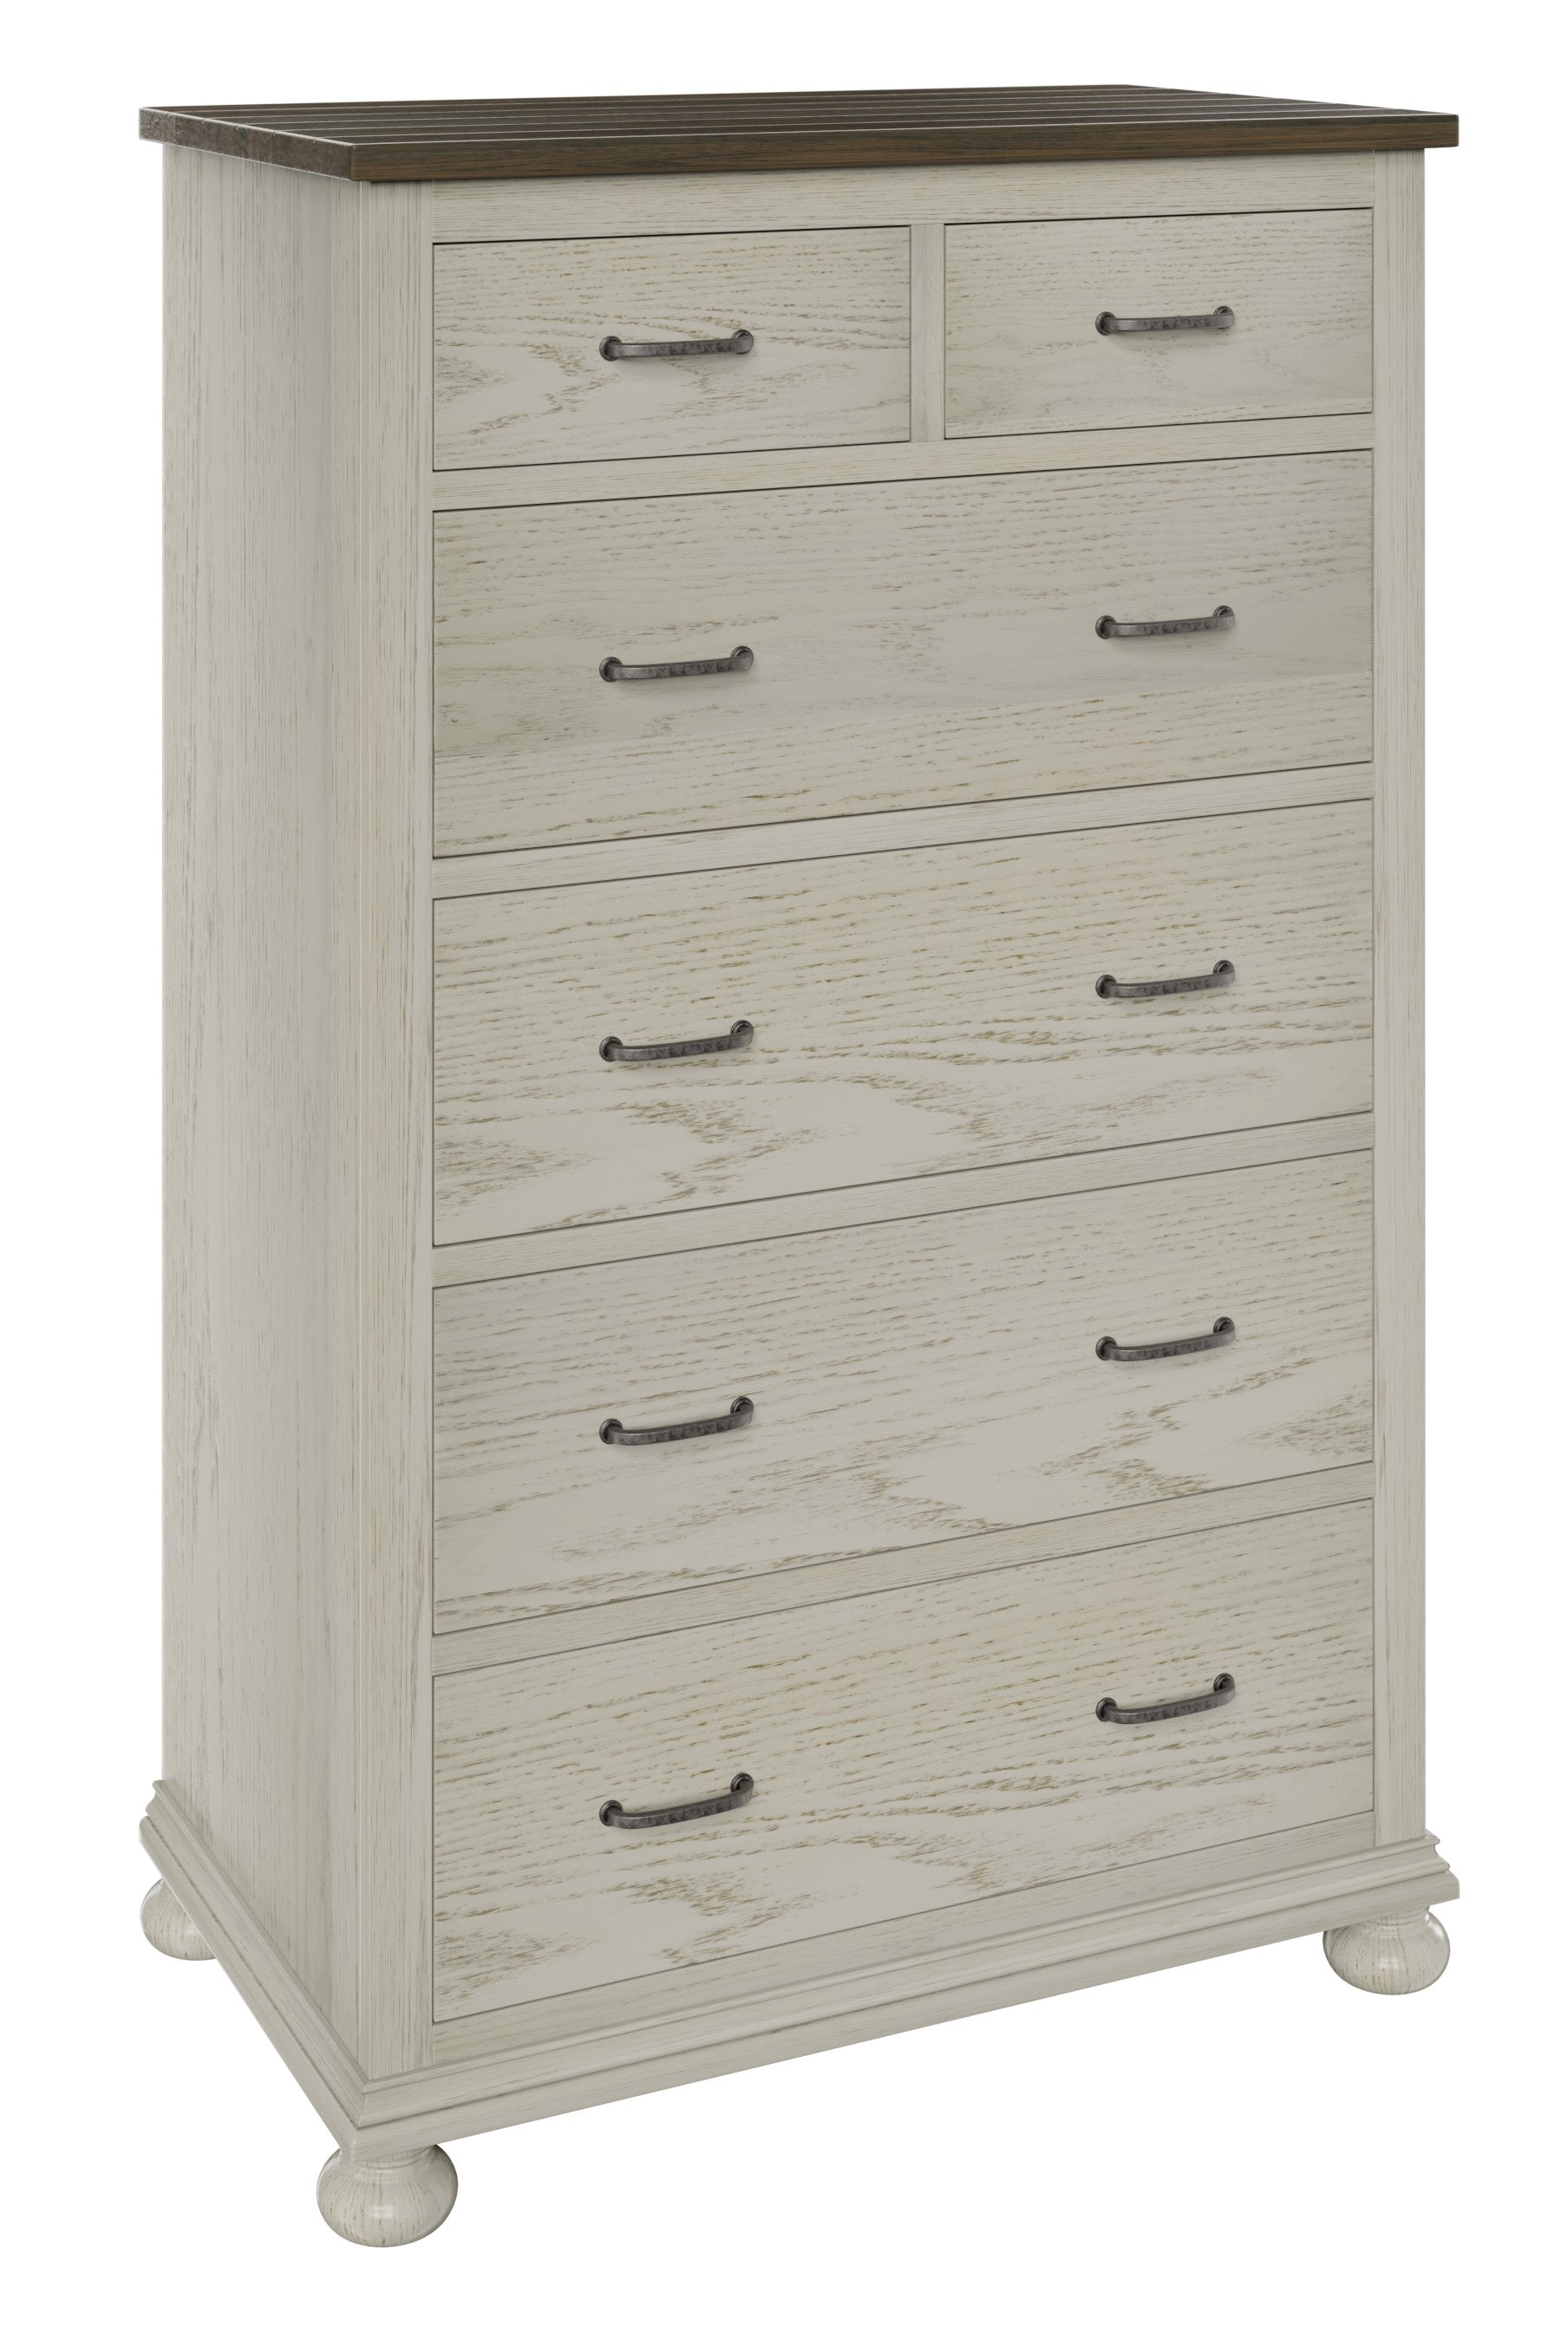 Amish Hickory Grove Chest of Drawers